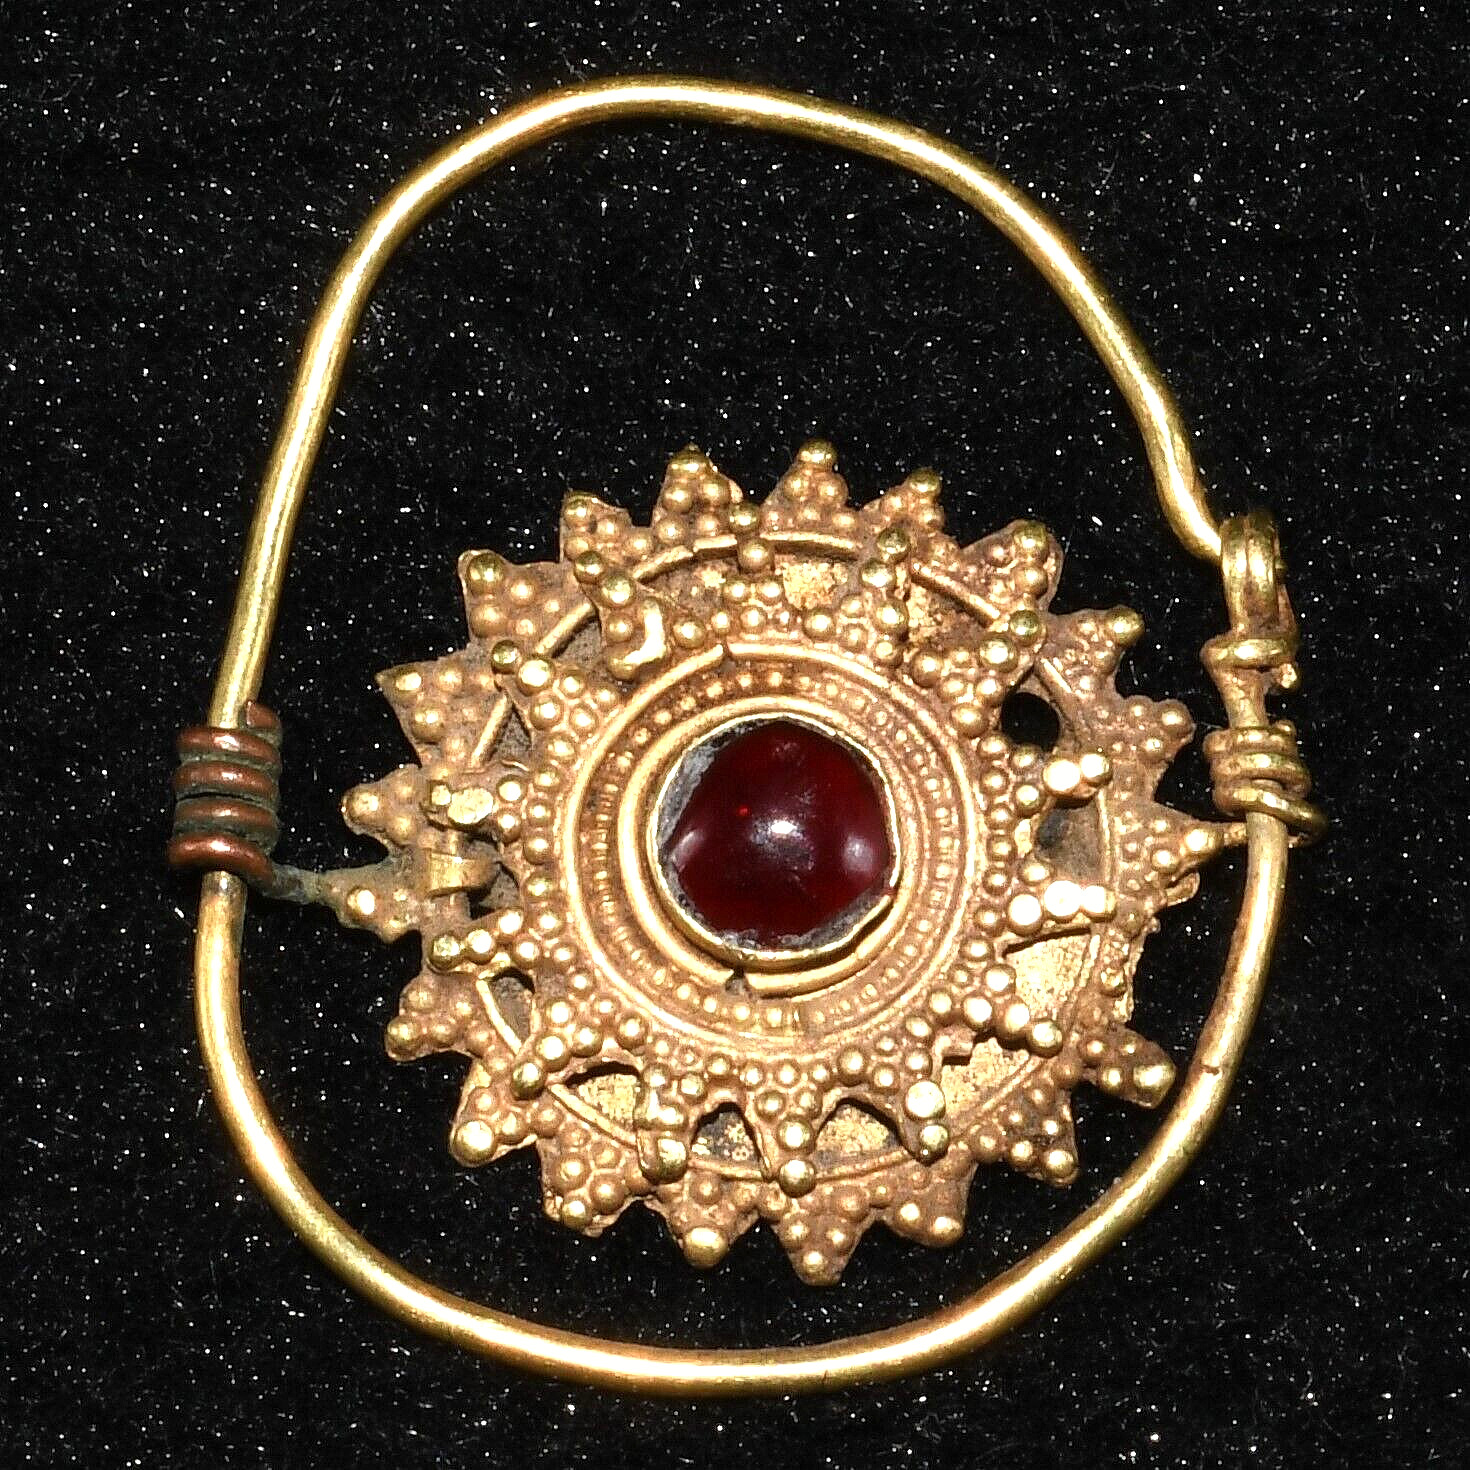 Genuine Large Ancient Roman Gold Earring Nose Ring with Central Garnet Inlay